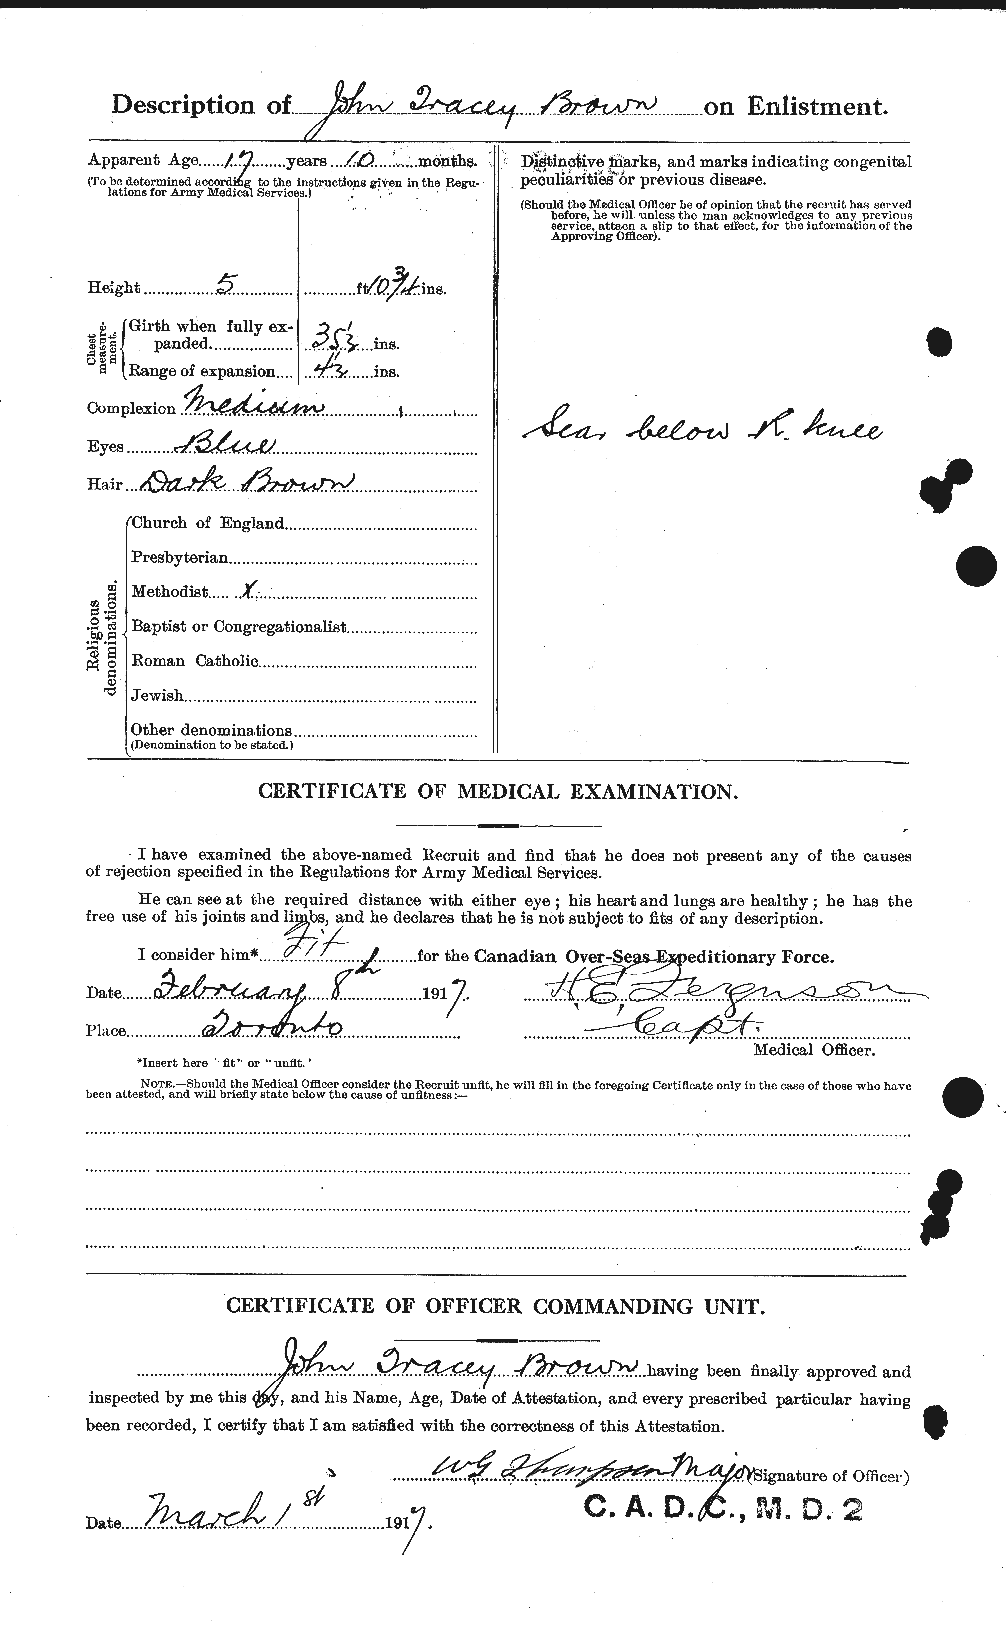 Personnel Records of the First World War - CEF 265892b